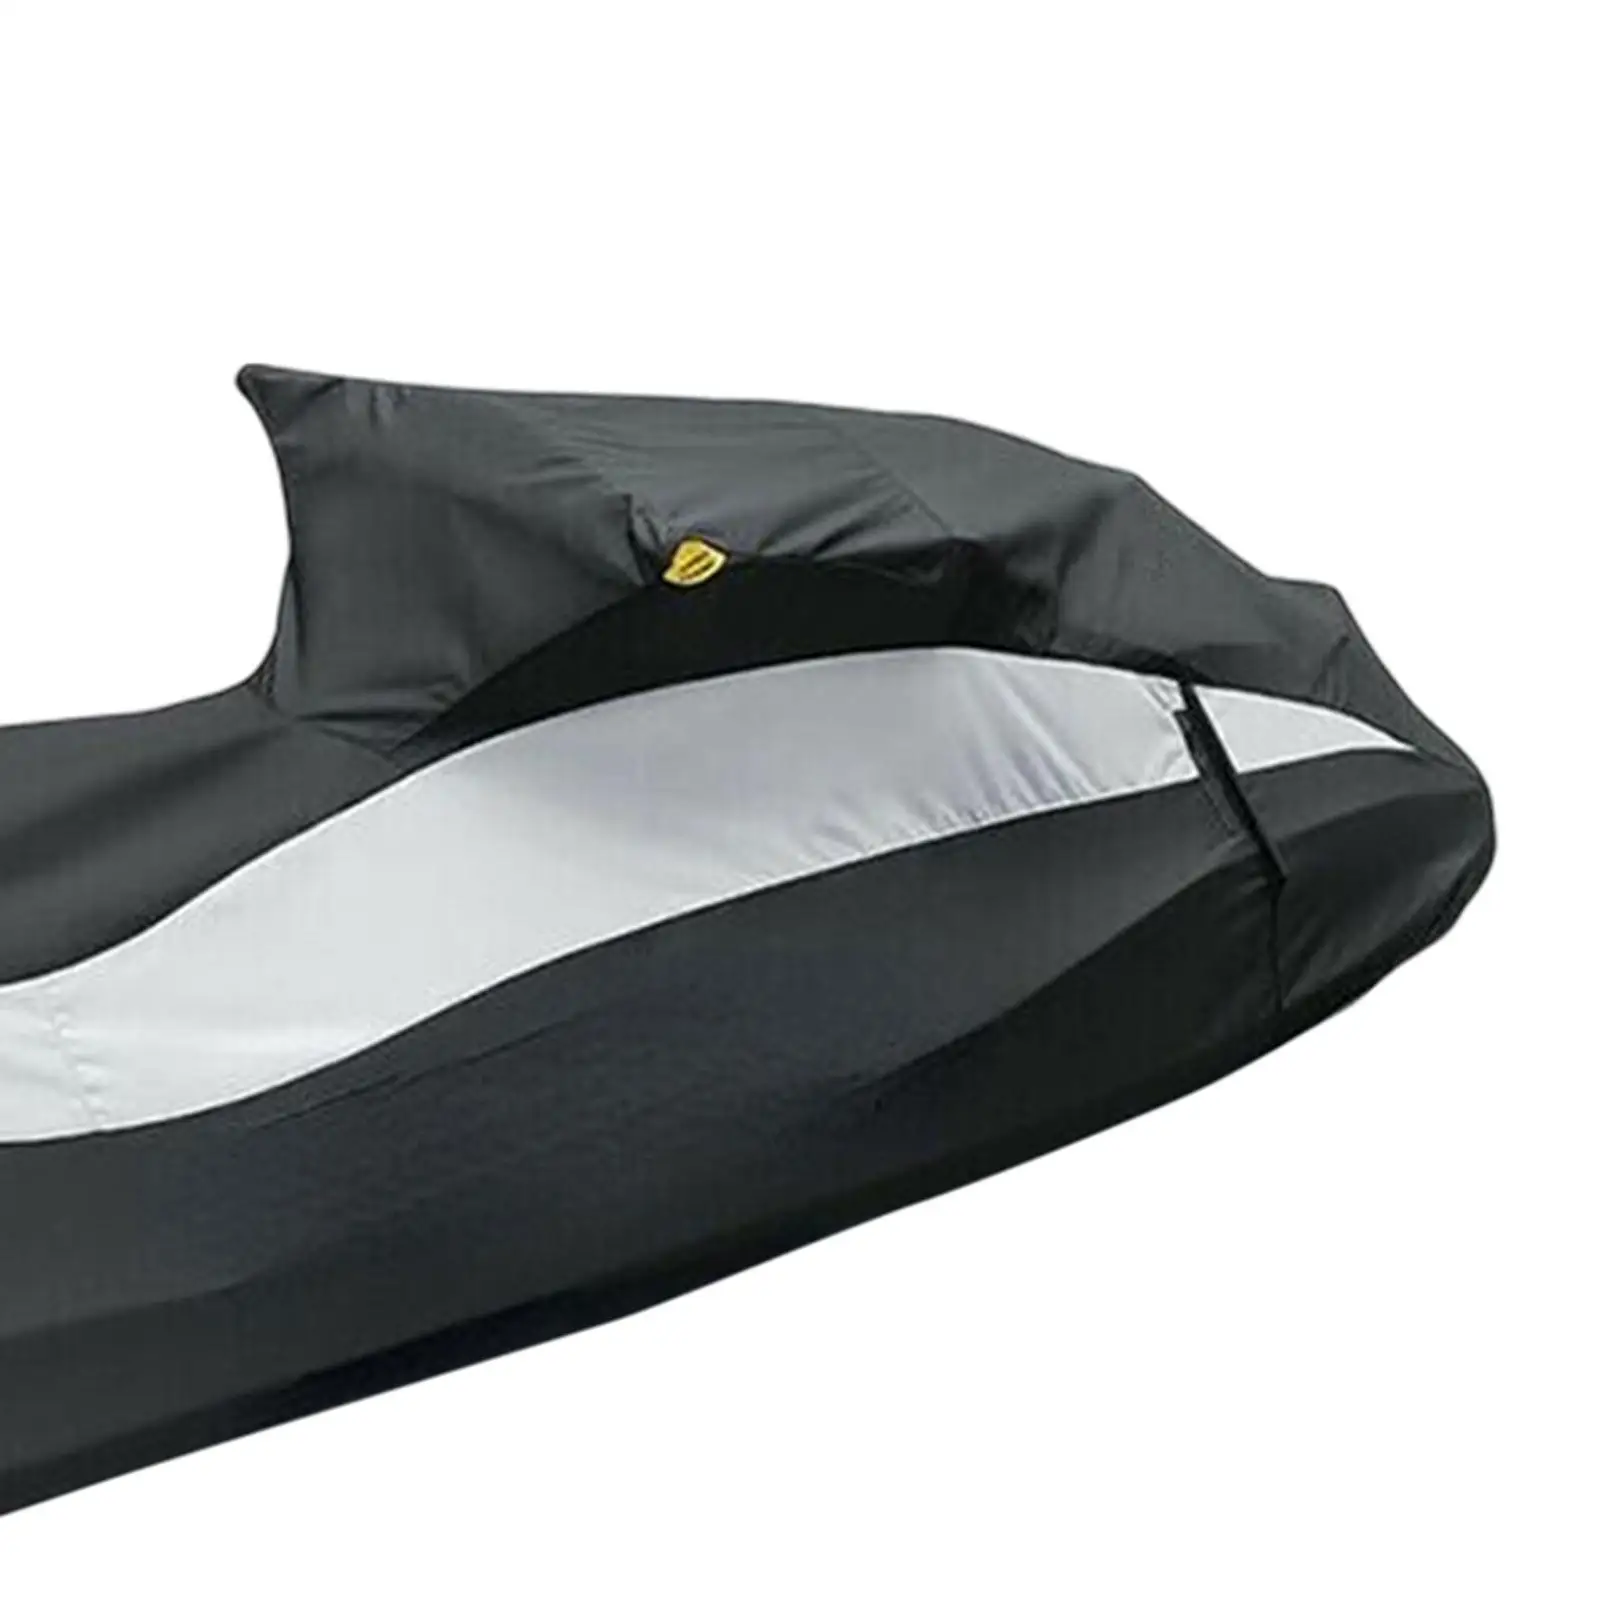 Jet Ski Watercraft Cover 295100722 Weather Resistant Scratch Free UV Resistant Boat Cover for GTS GTS Rental GTI GTI SE